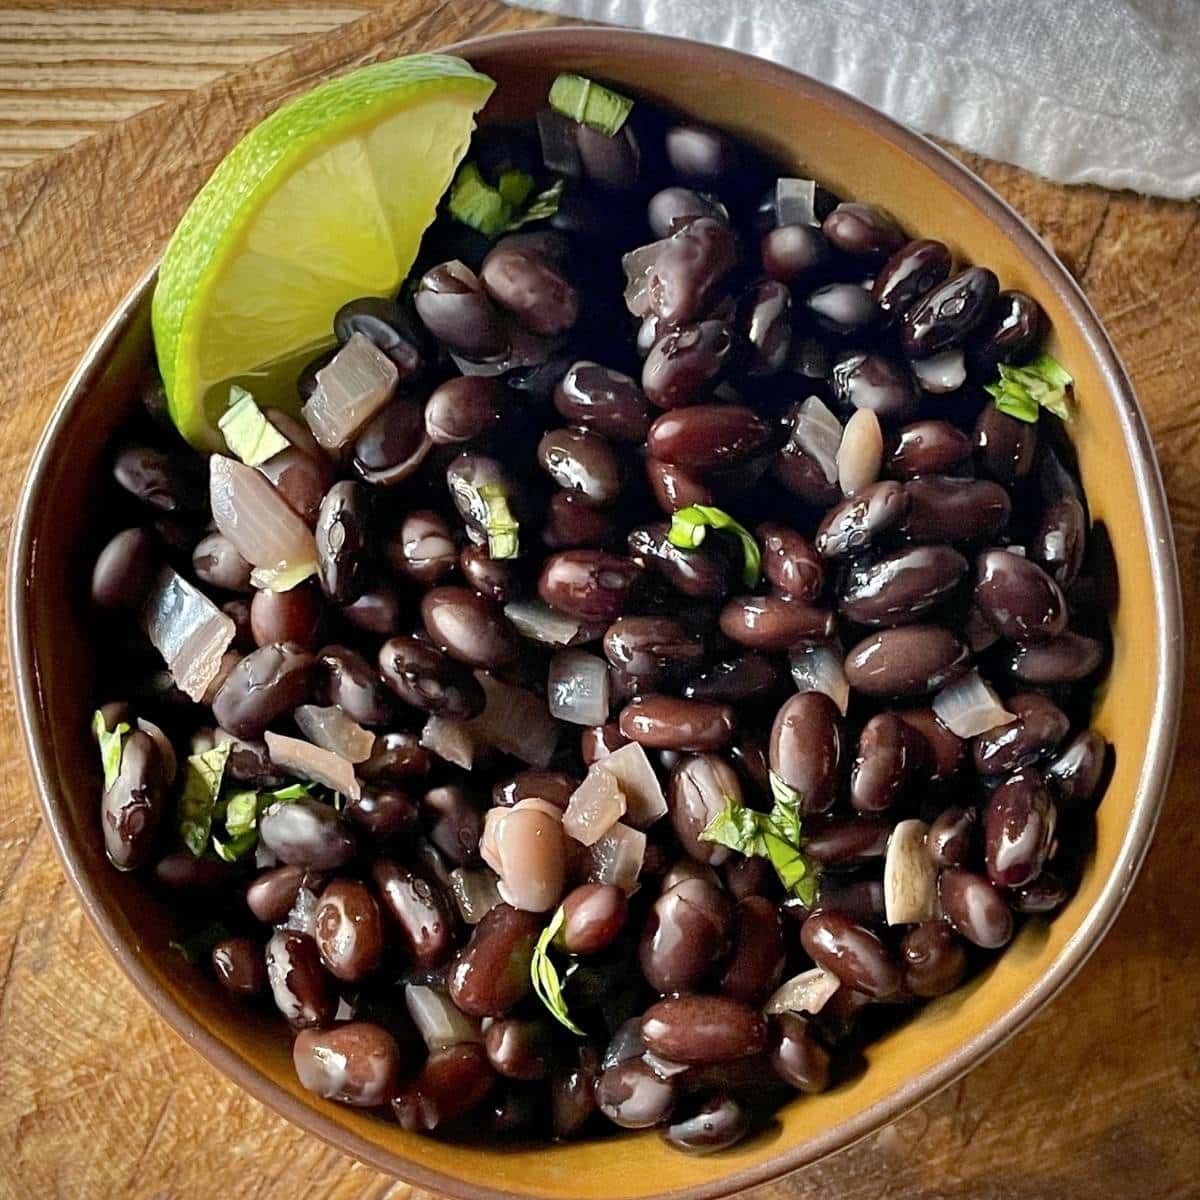 A bowl of black beans with a lime wedge as garnish.